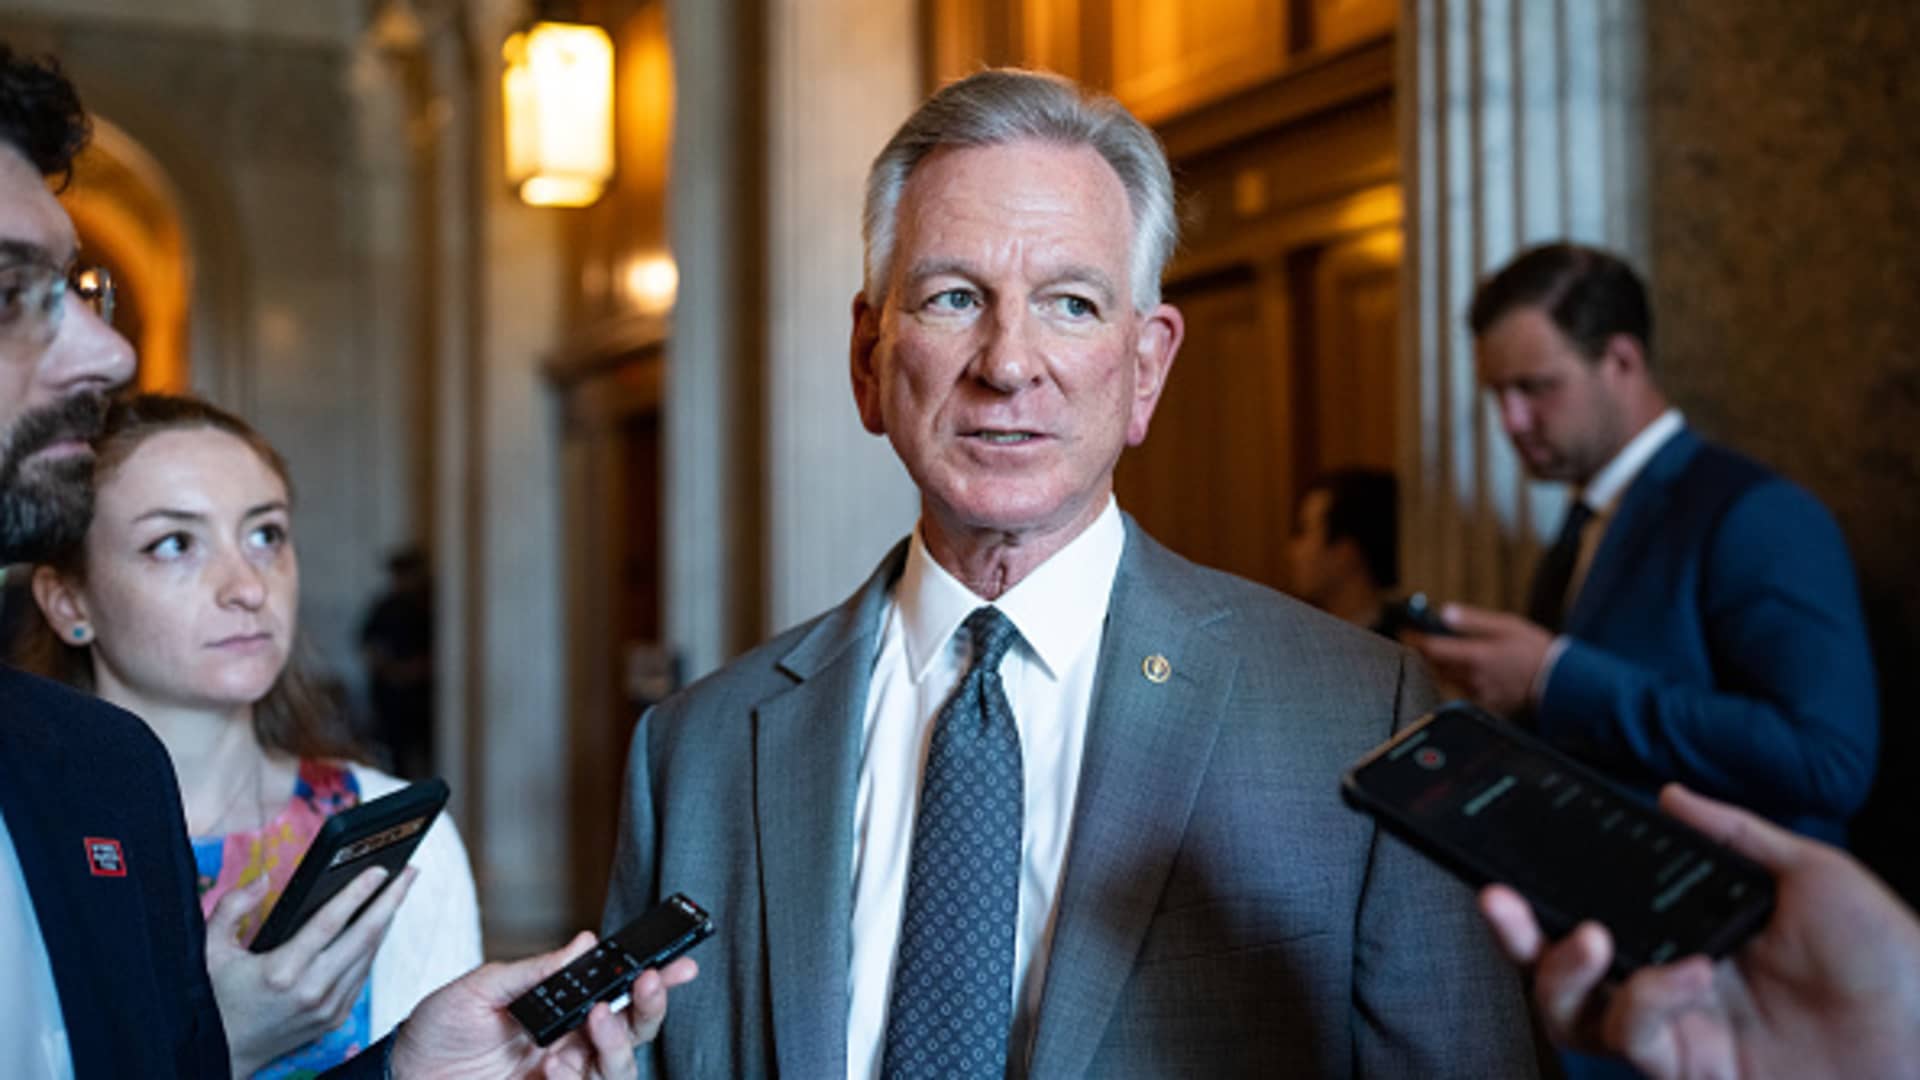 Sen. Tommy Tuberville says U.S. military not an ‘equal opportunity employer’